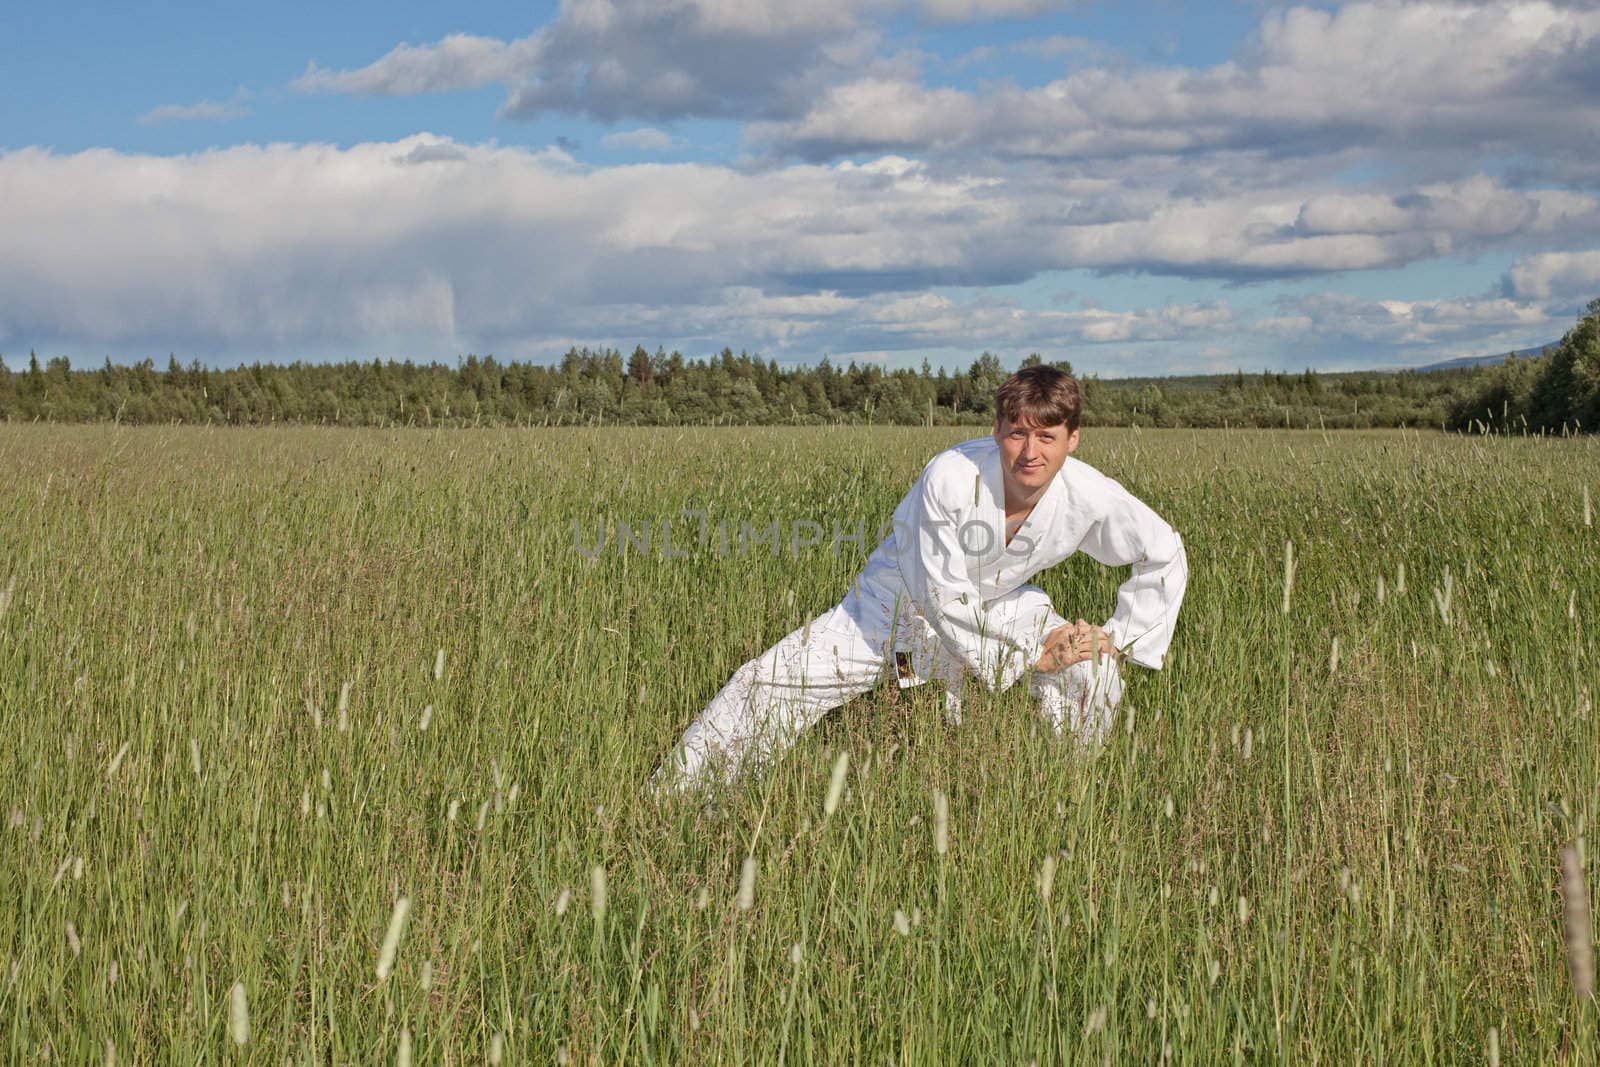 The young man practices Wushu in the field